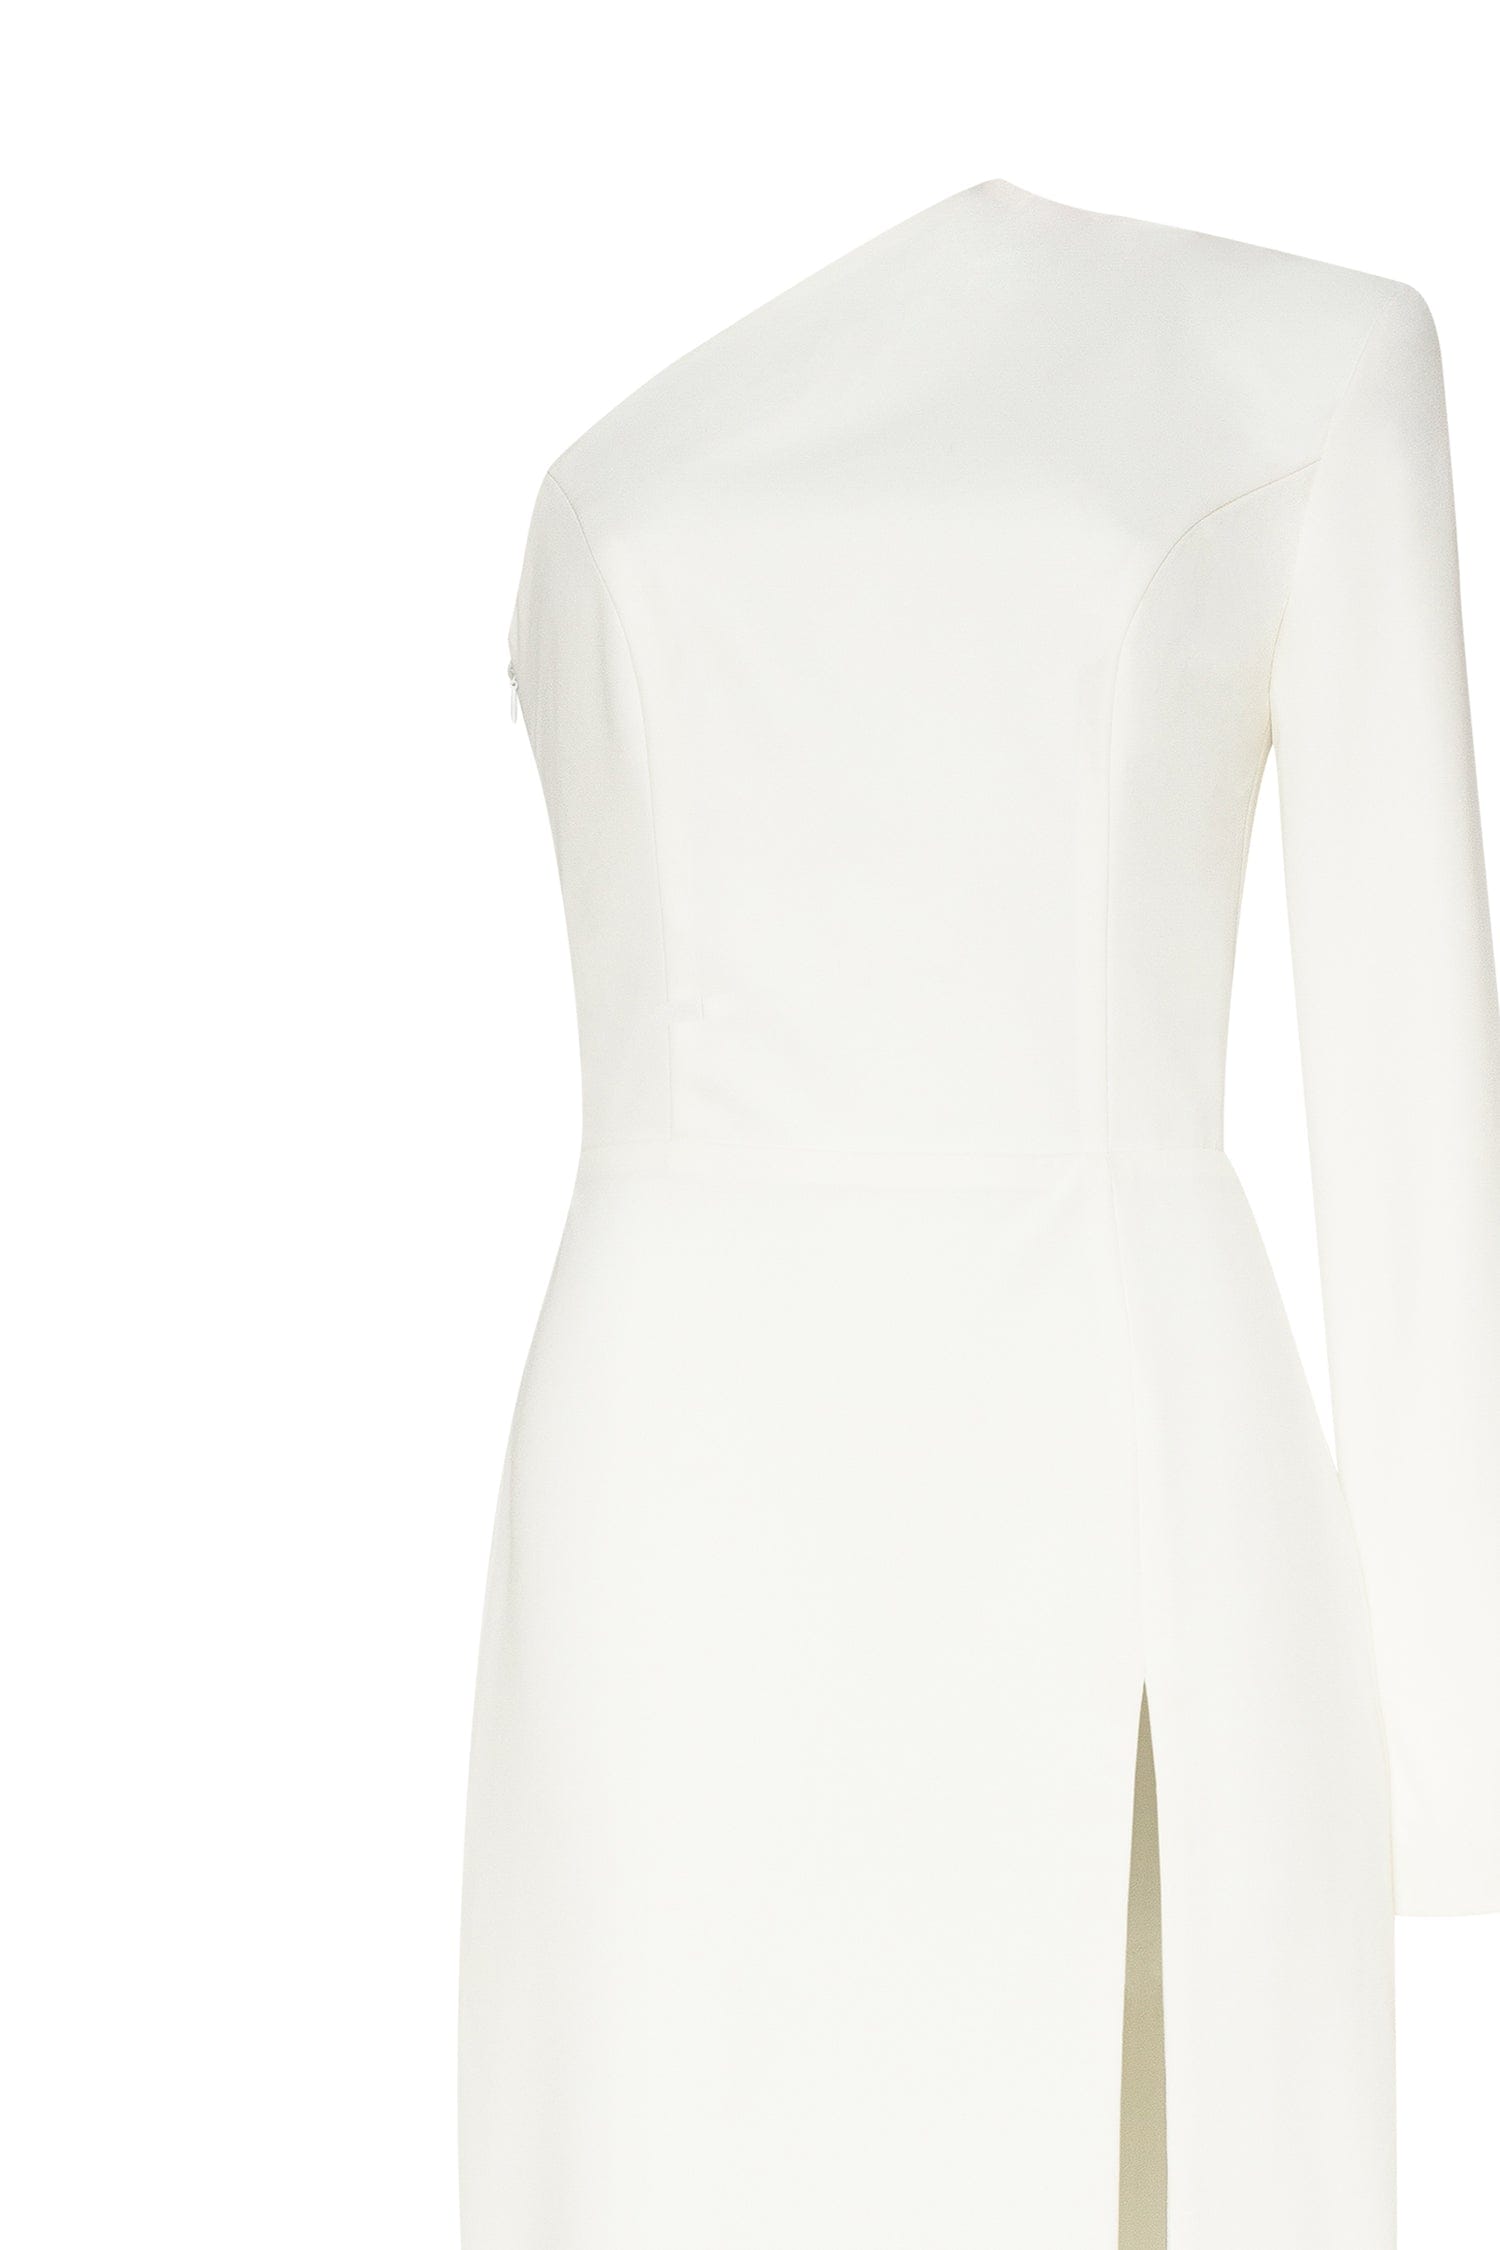 White Long-sleeved dress with sharp shoulder cut - Milla